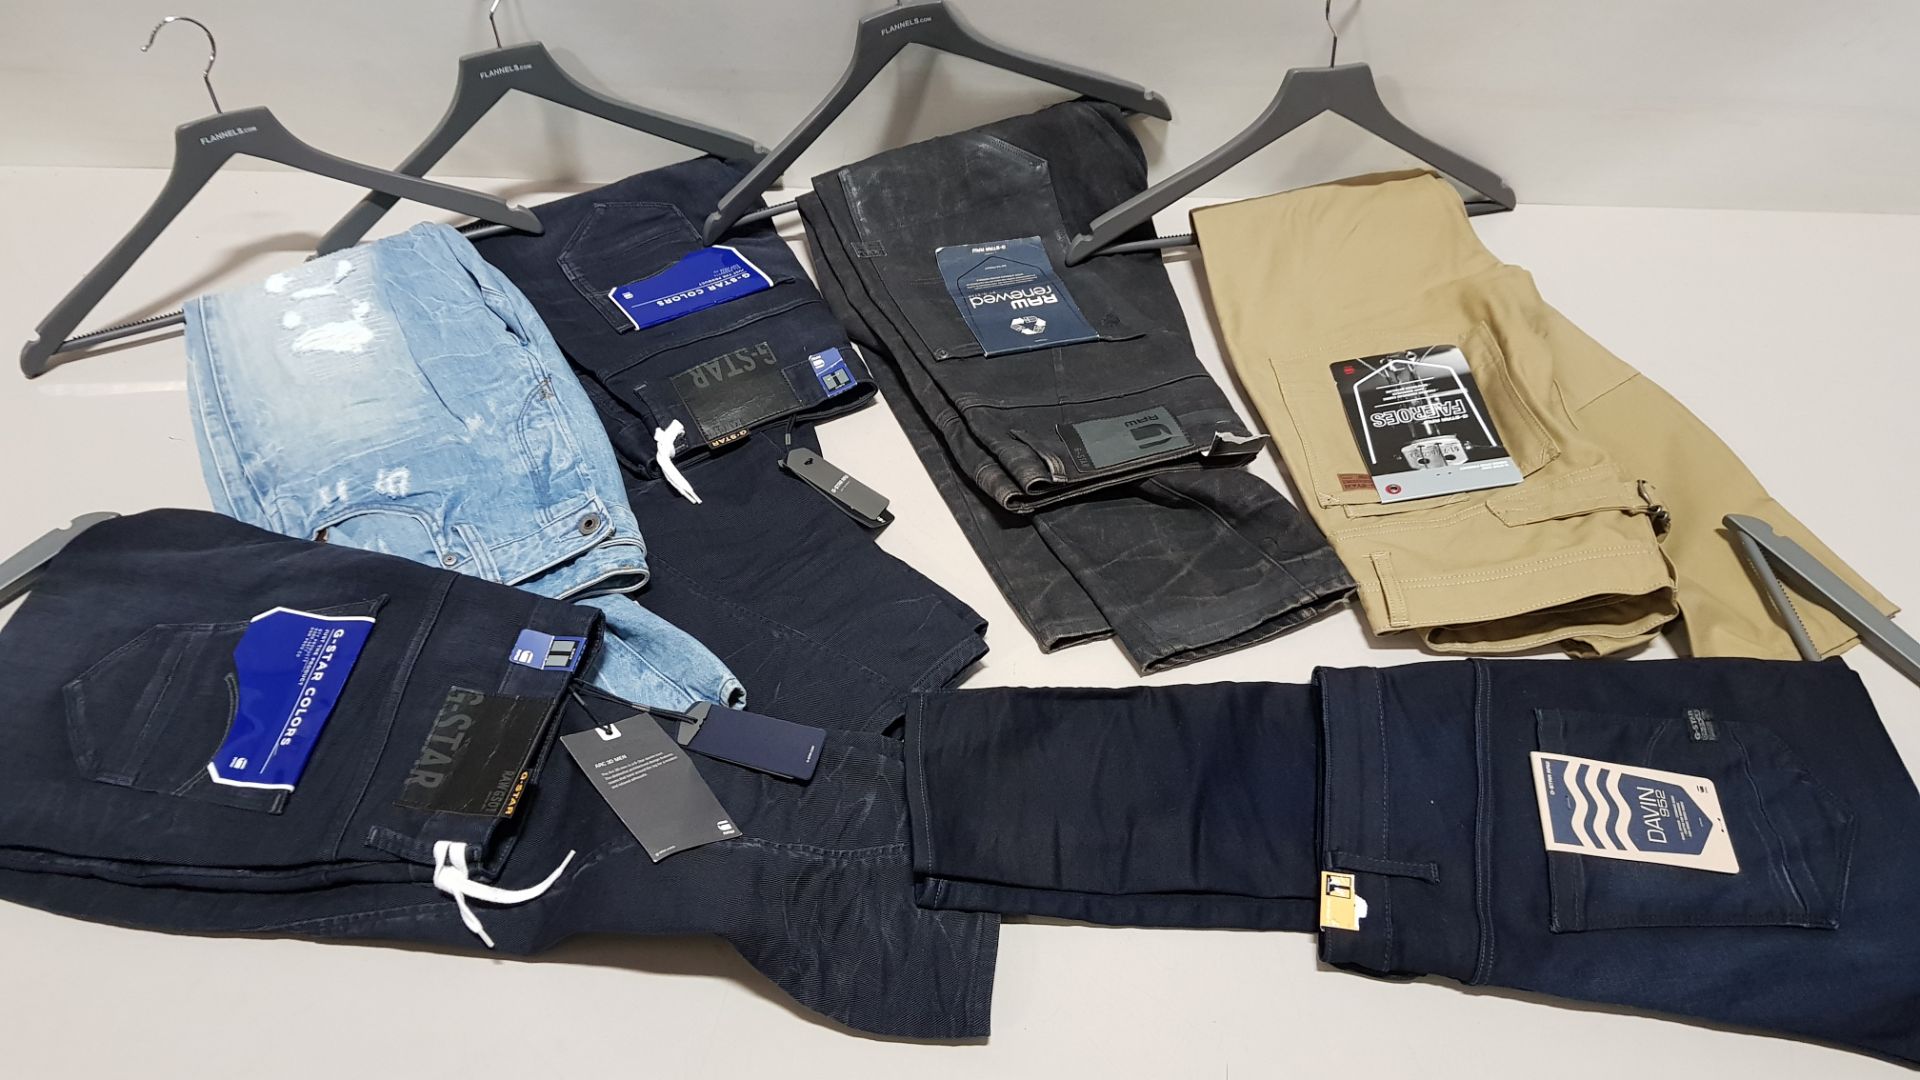 6 X PAIRS OF BRAND NEW G-STAR RAW JEANS IN VARIOUS STYLES & COLOURS IE. LIGHT BLUE, DARK BLUE AND